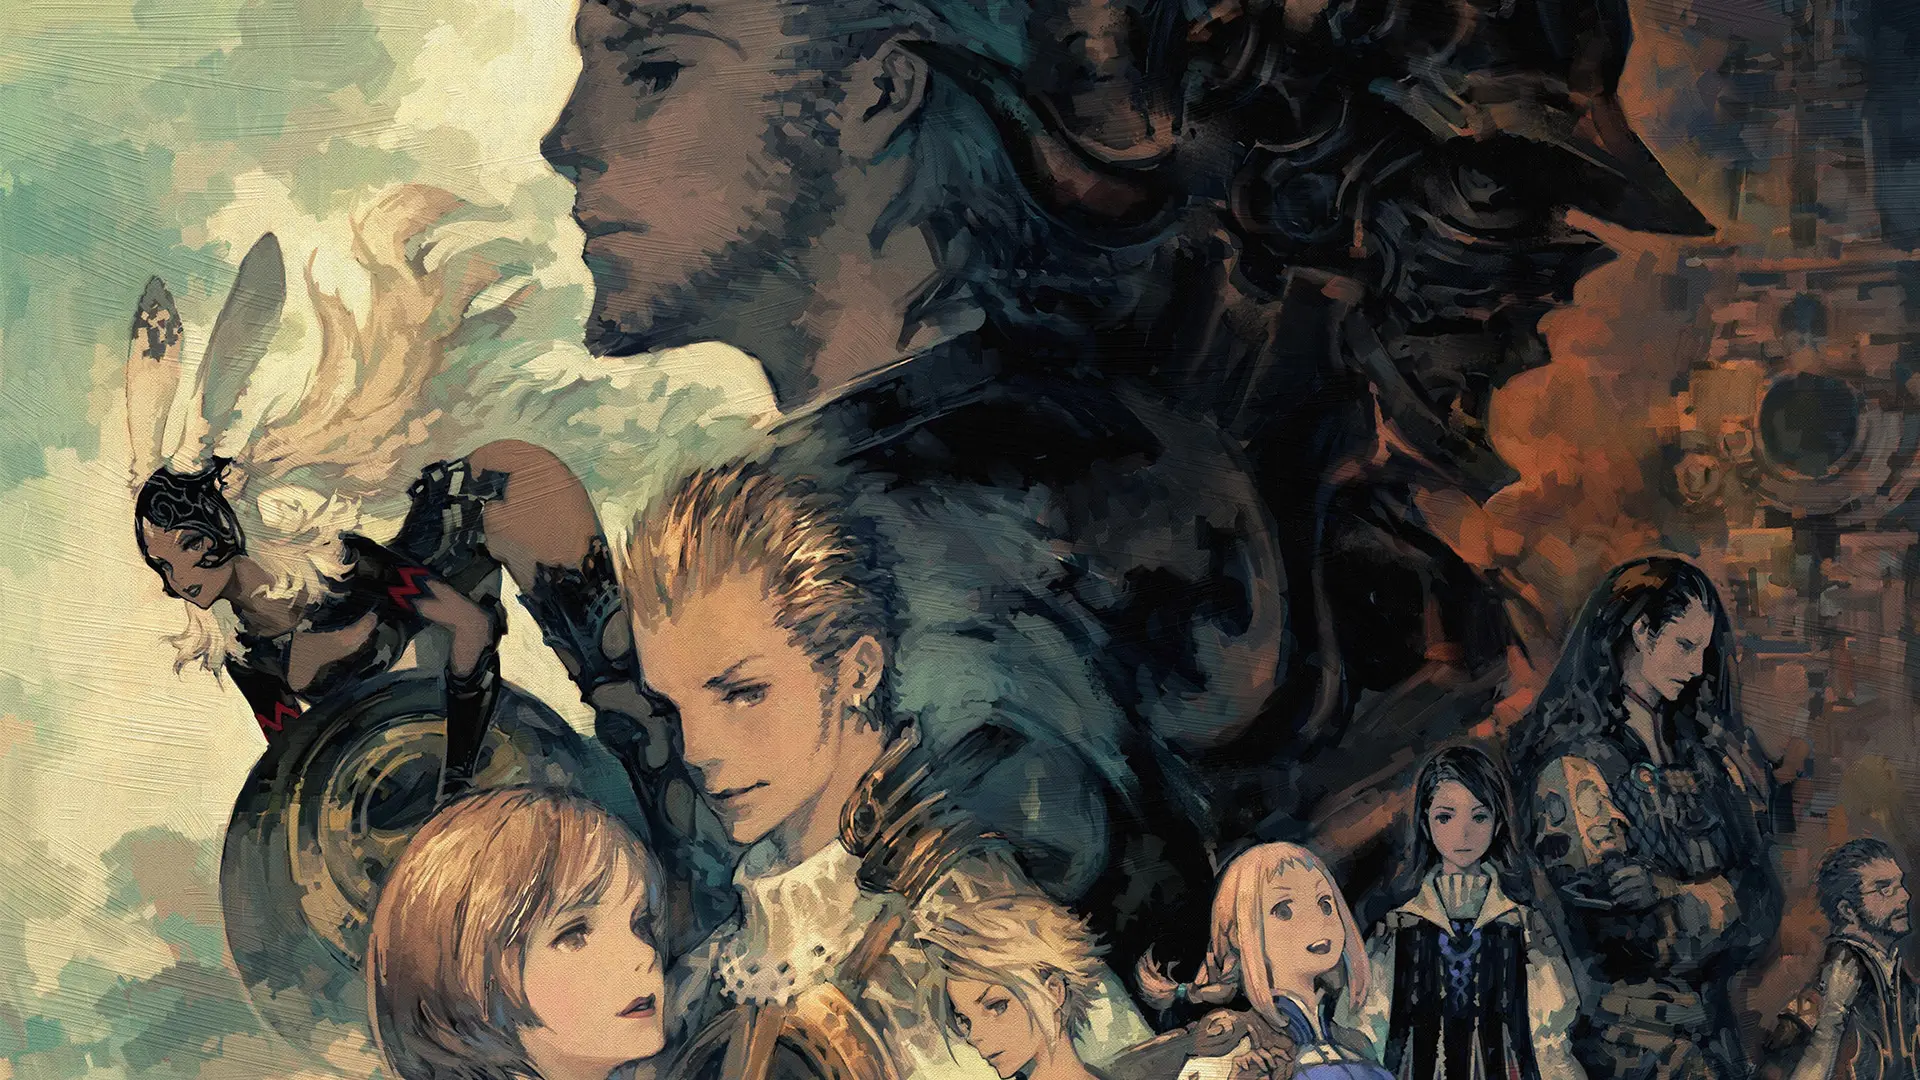 VIRTUOS CO-DEVELOPING FINAL FANTASY TITLES WILL DEBUT ON NINTENDO SWITCH AND XBOX ONE IN 2019